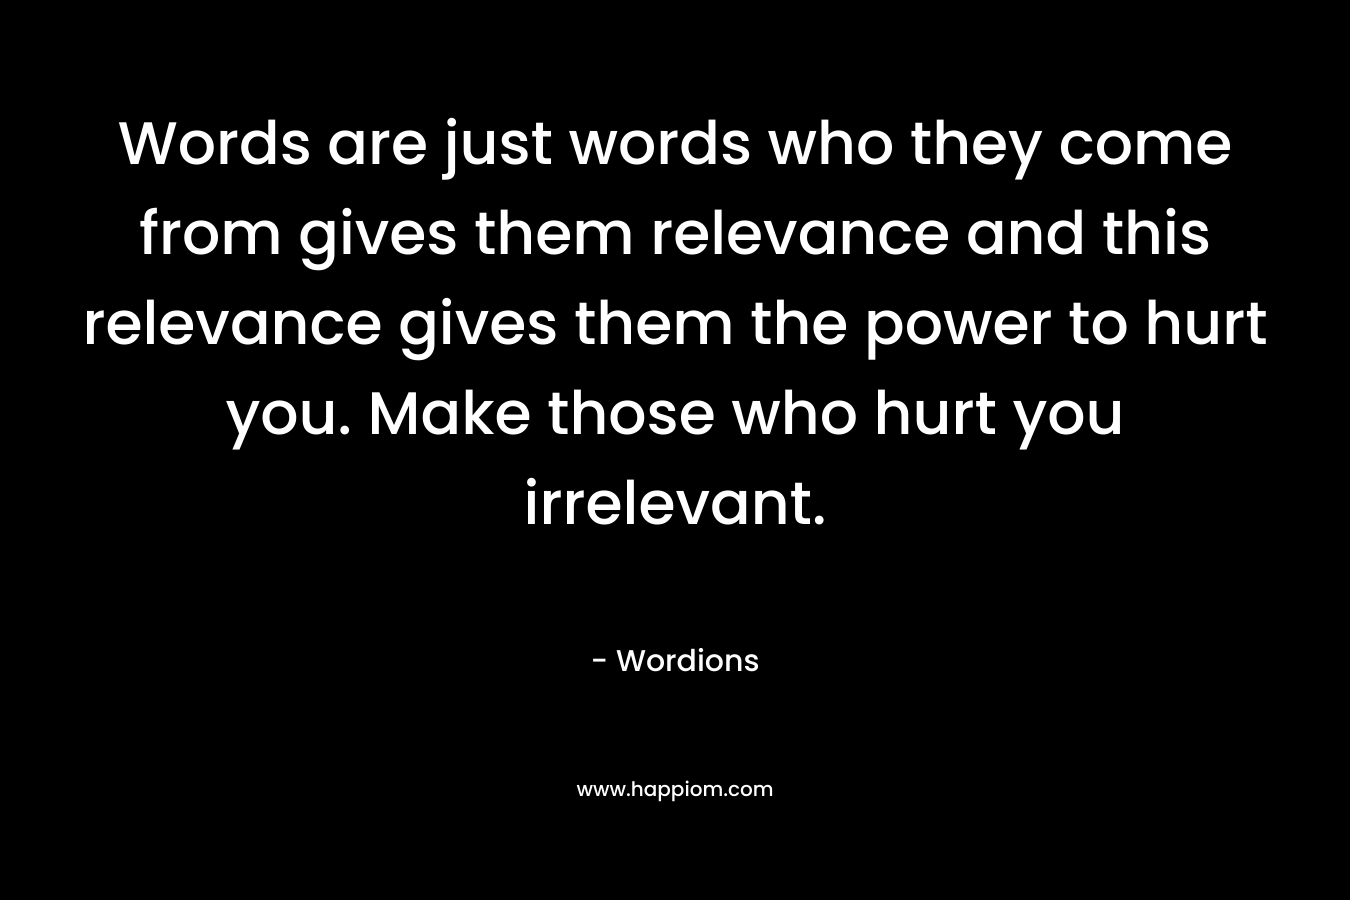 Words are just words who they come from gives them relevance and this relevance gives them the power to hurt you. Make those who hurt you irrelevant. – Wordions